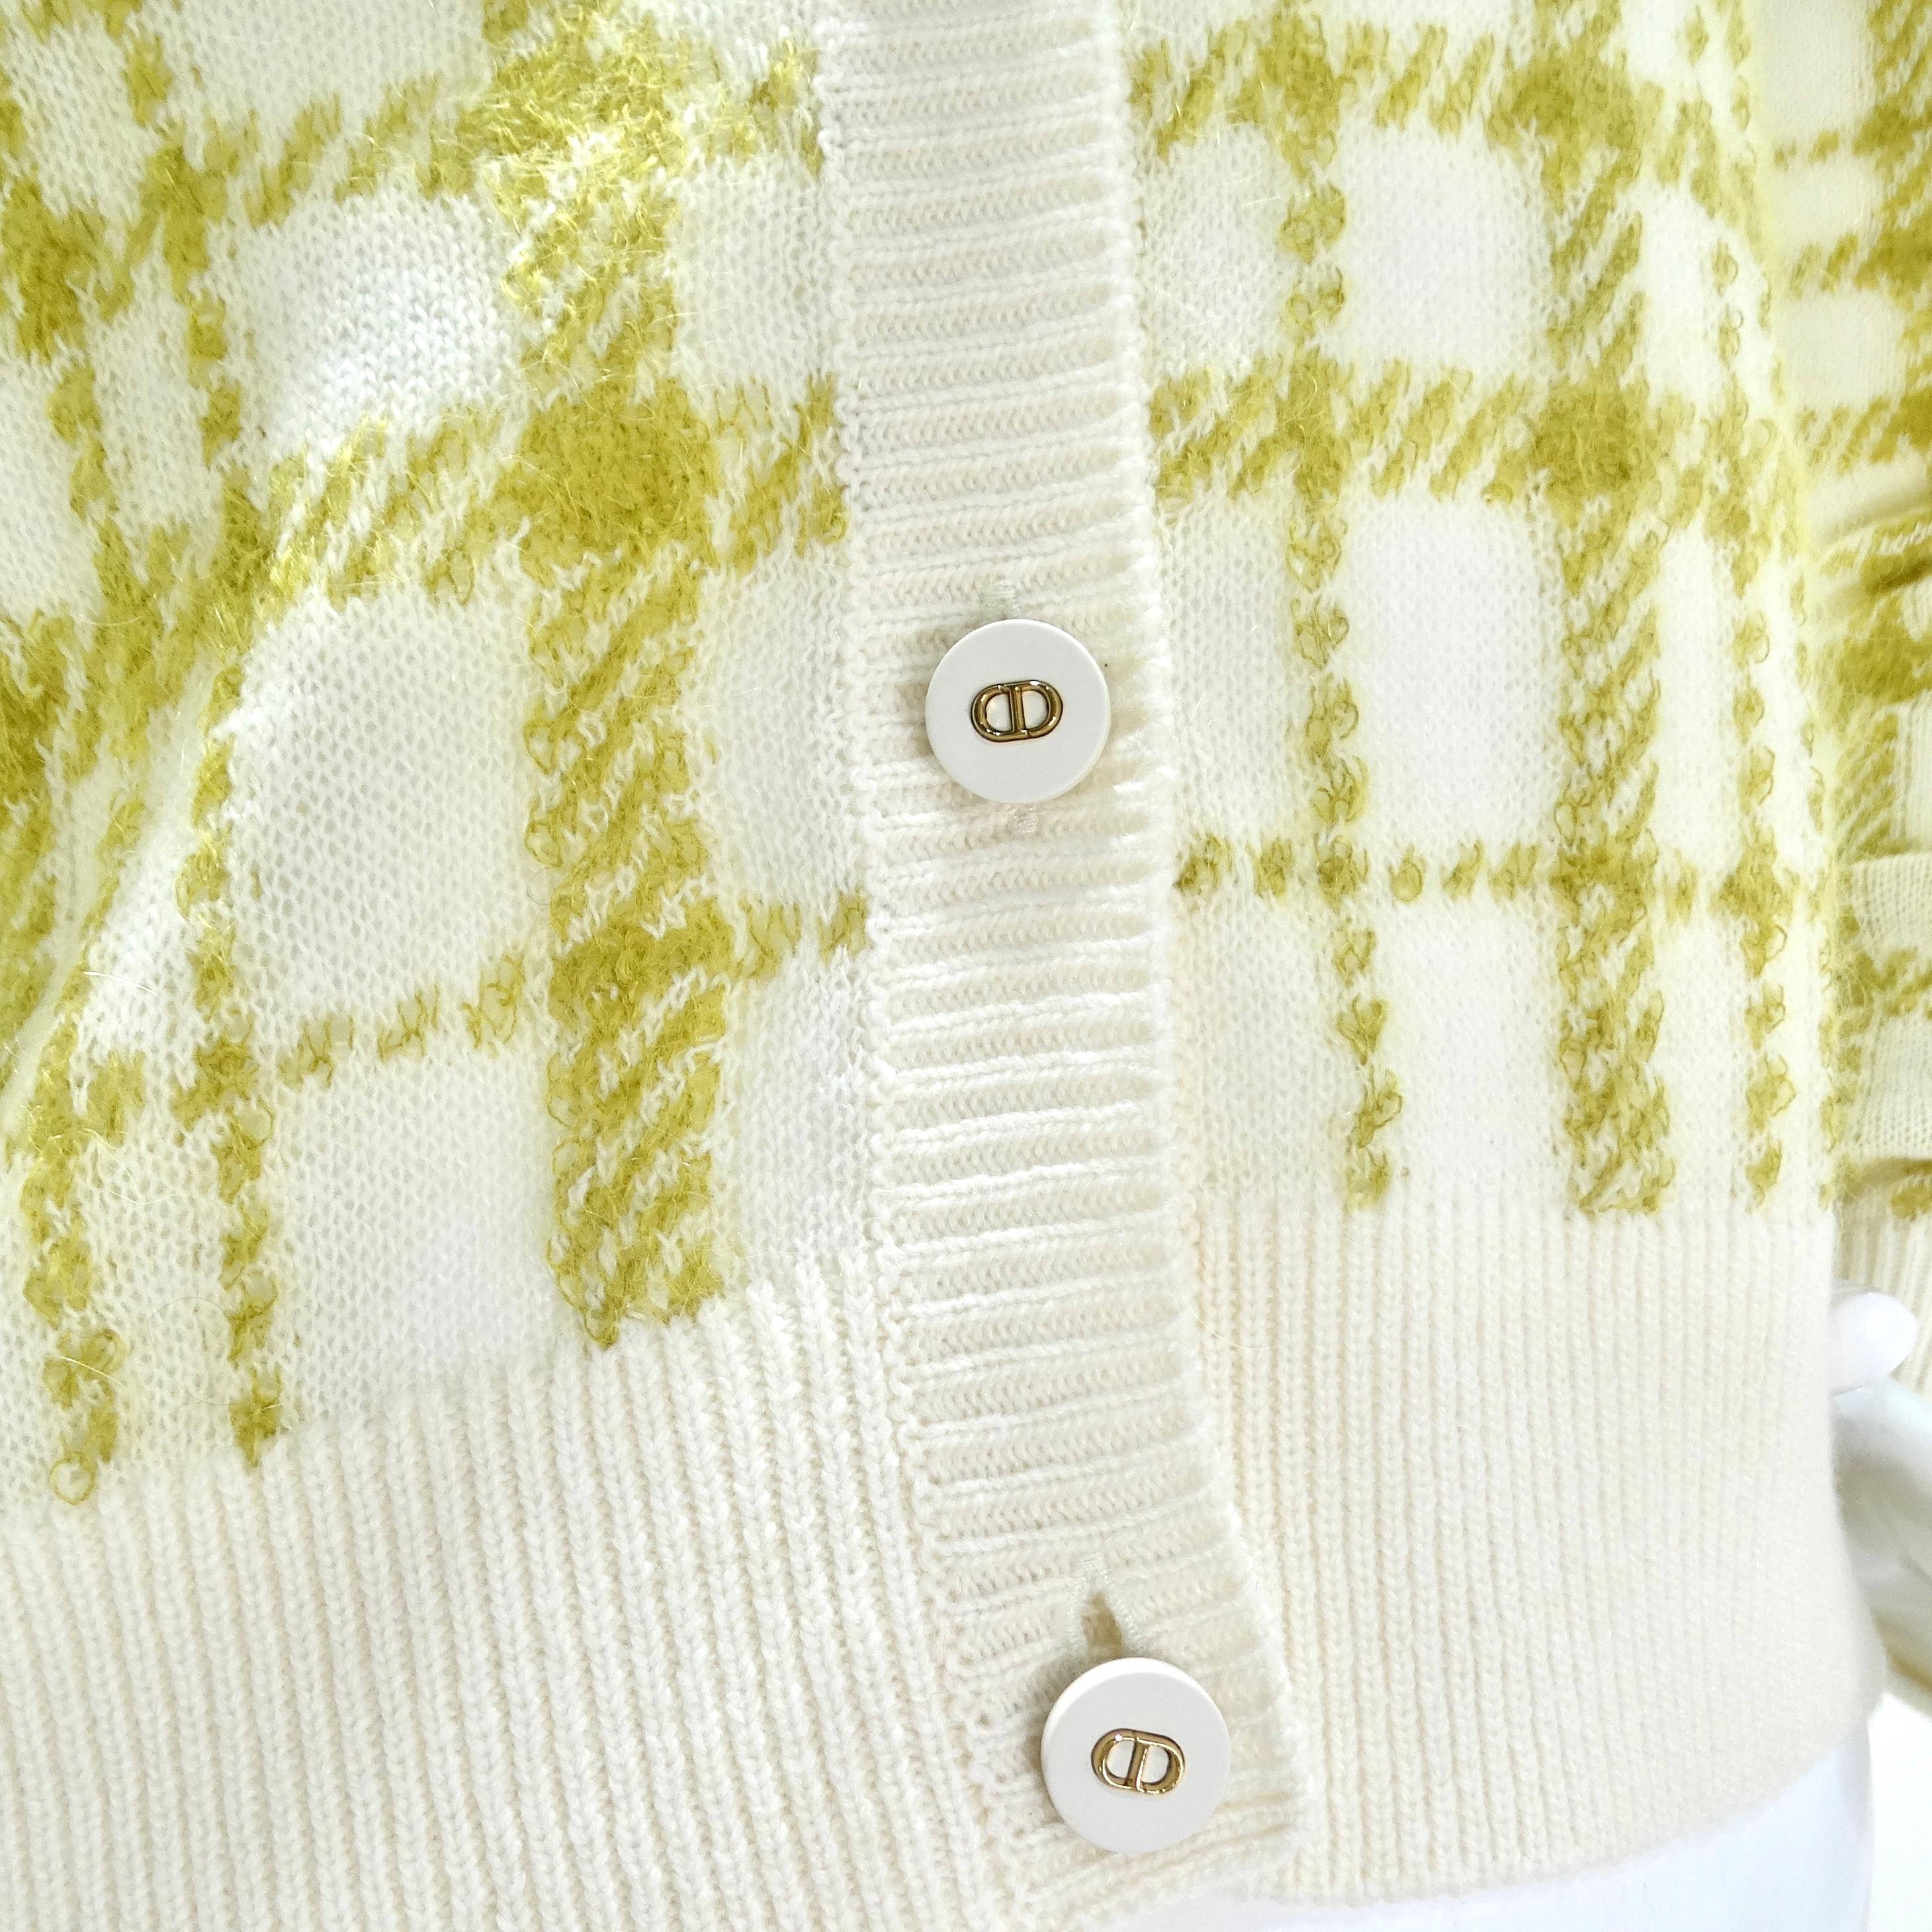 Wrap yourself in luxury with the Christian Dior 2021 Plaid Wool Cardigan – a classic and vibrant piece that effortlessly combines style and comfort. Crafted from yellow tone lime green and white plaid in a luxurious wool knit, this cardigan is a